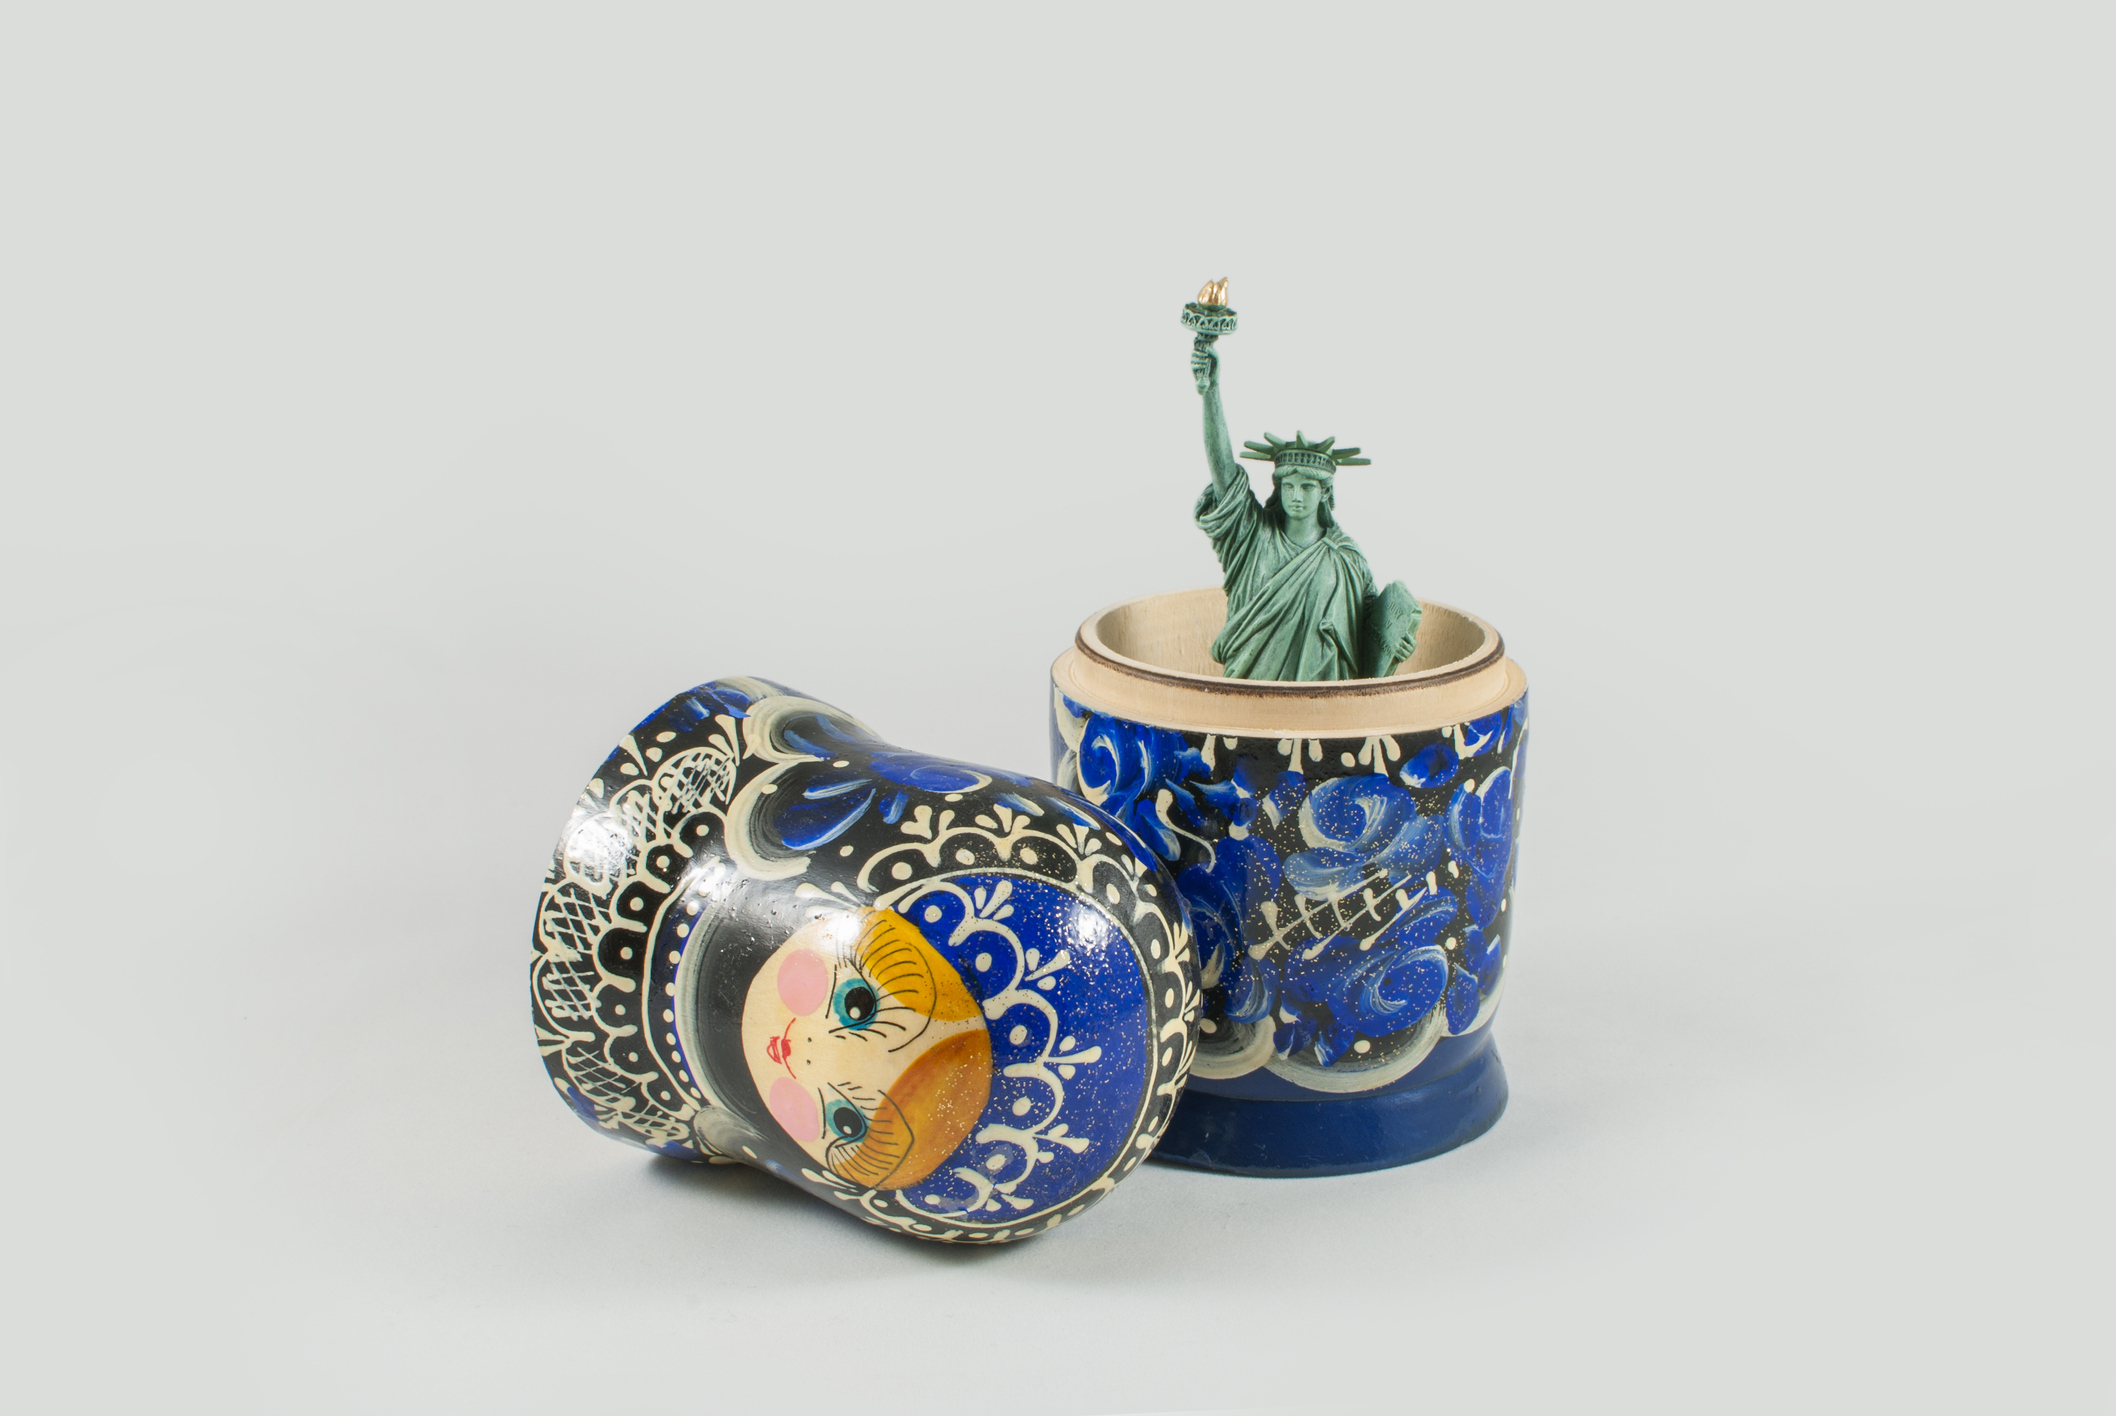 Statue of Liberty inside of Russian nesting doll